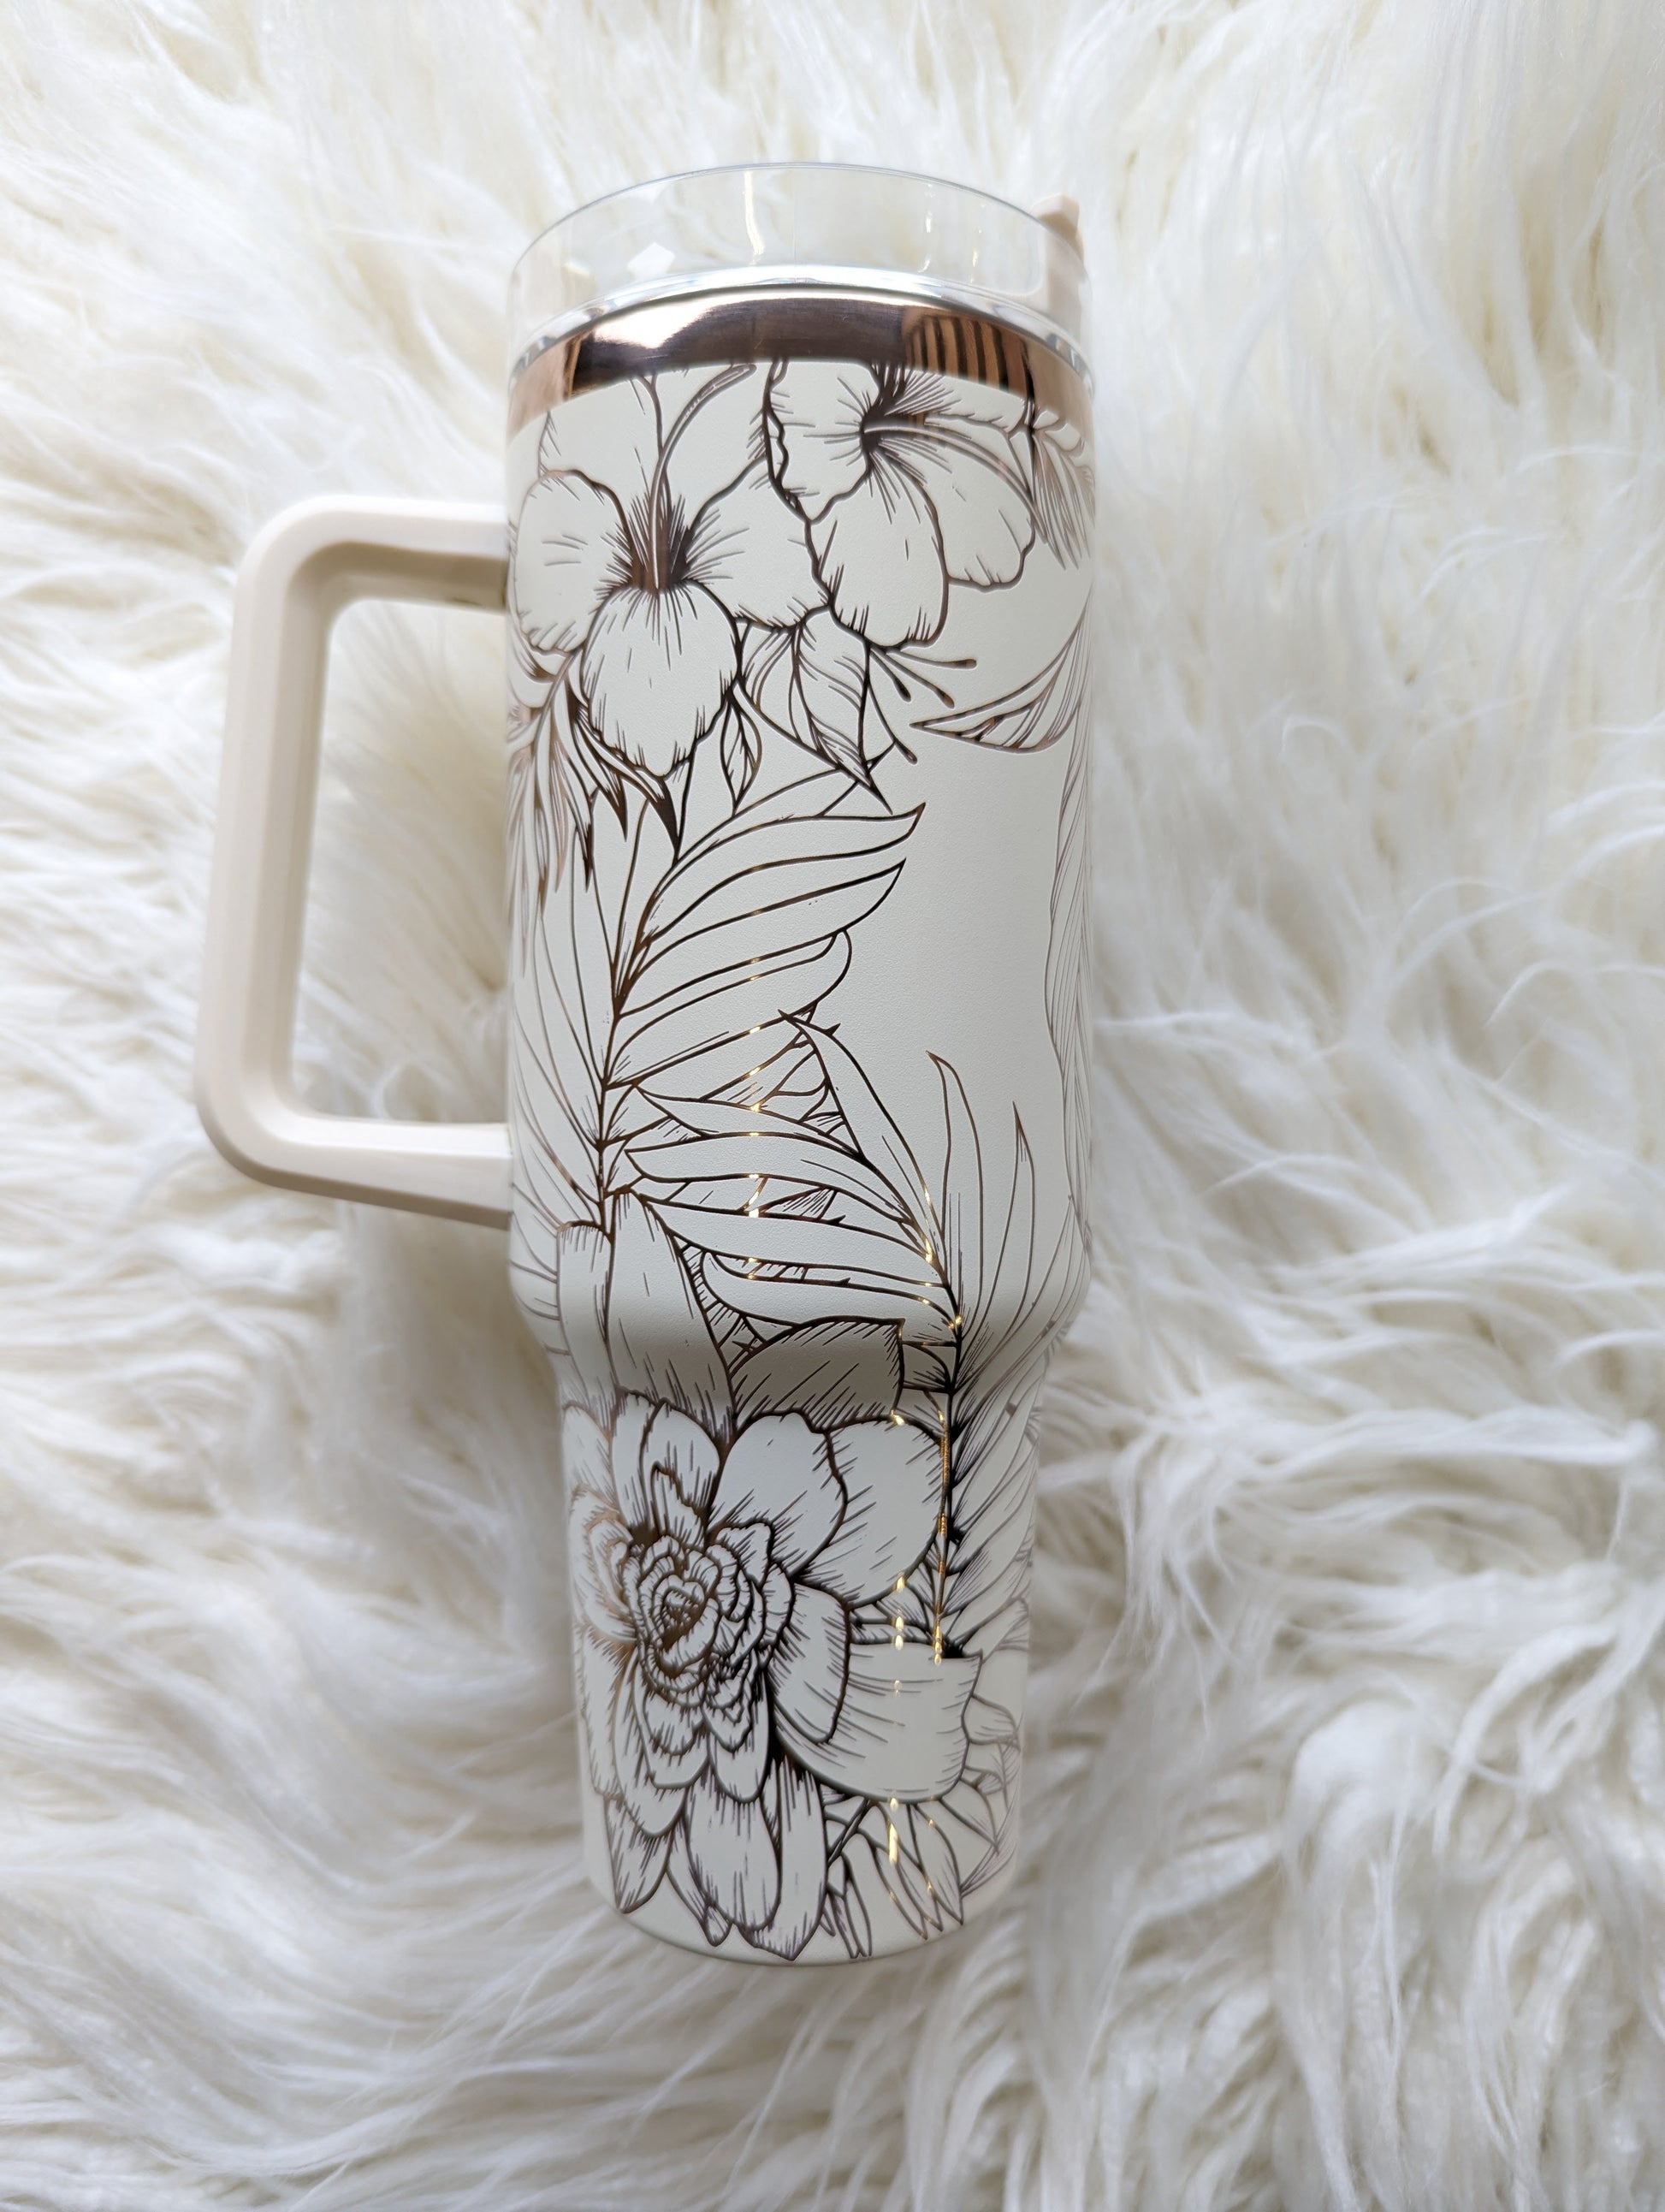 Photo is a 40 oz insulated tumbler in cream/copper engraved with a tropical flower pattern